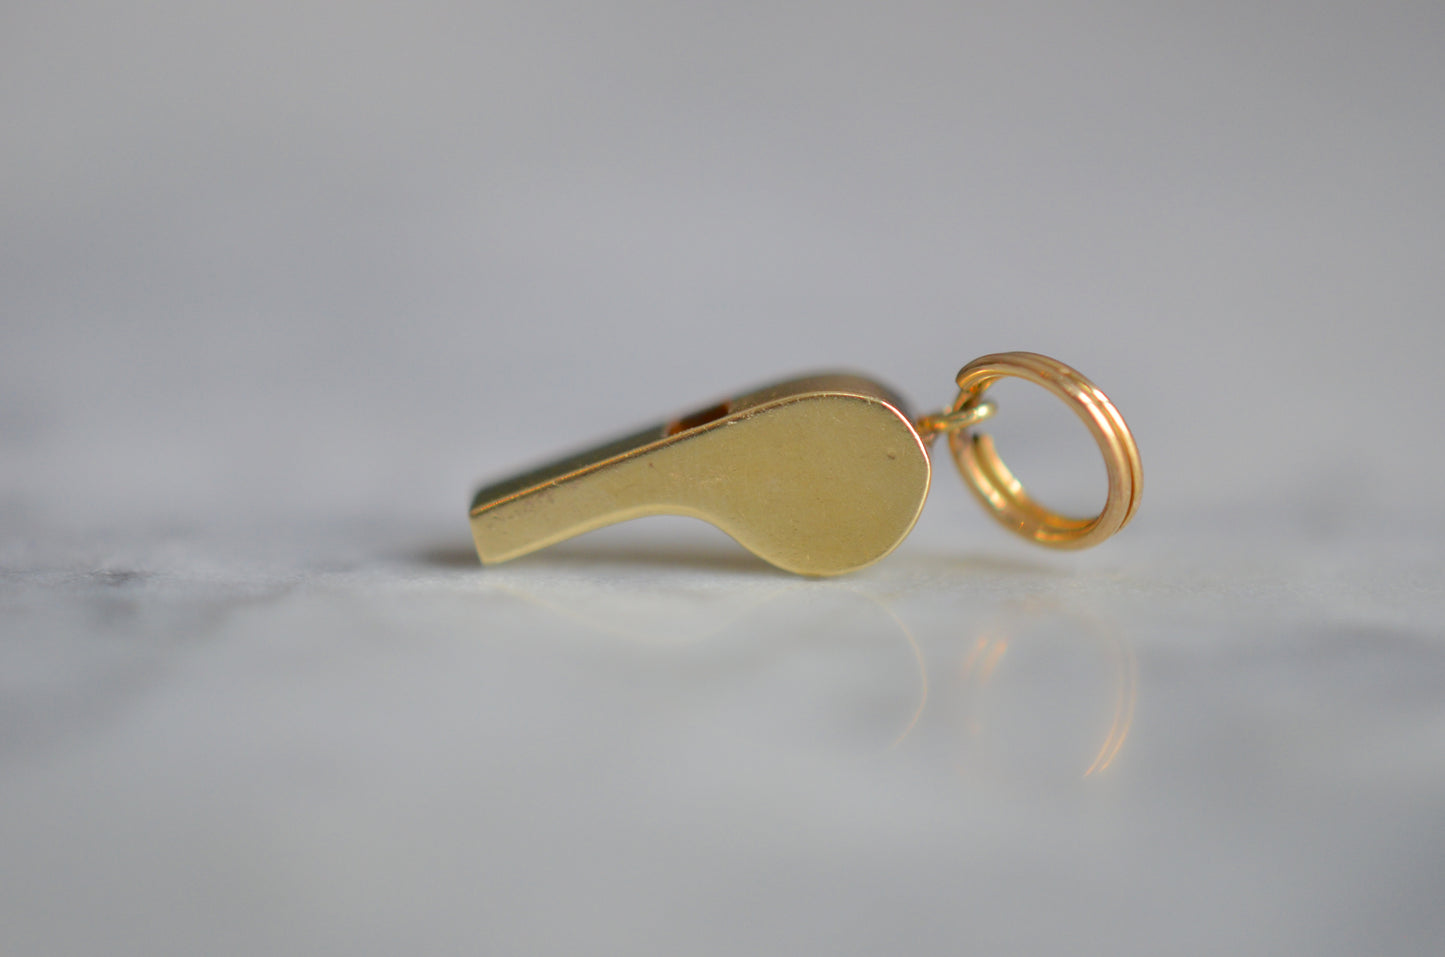 Itty Bitty Working Gold Whistle